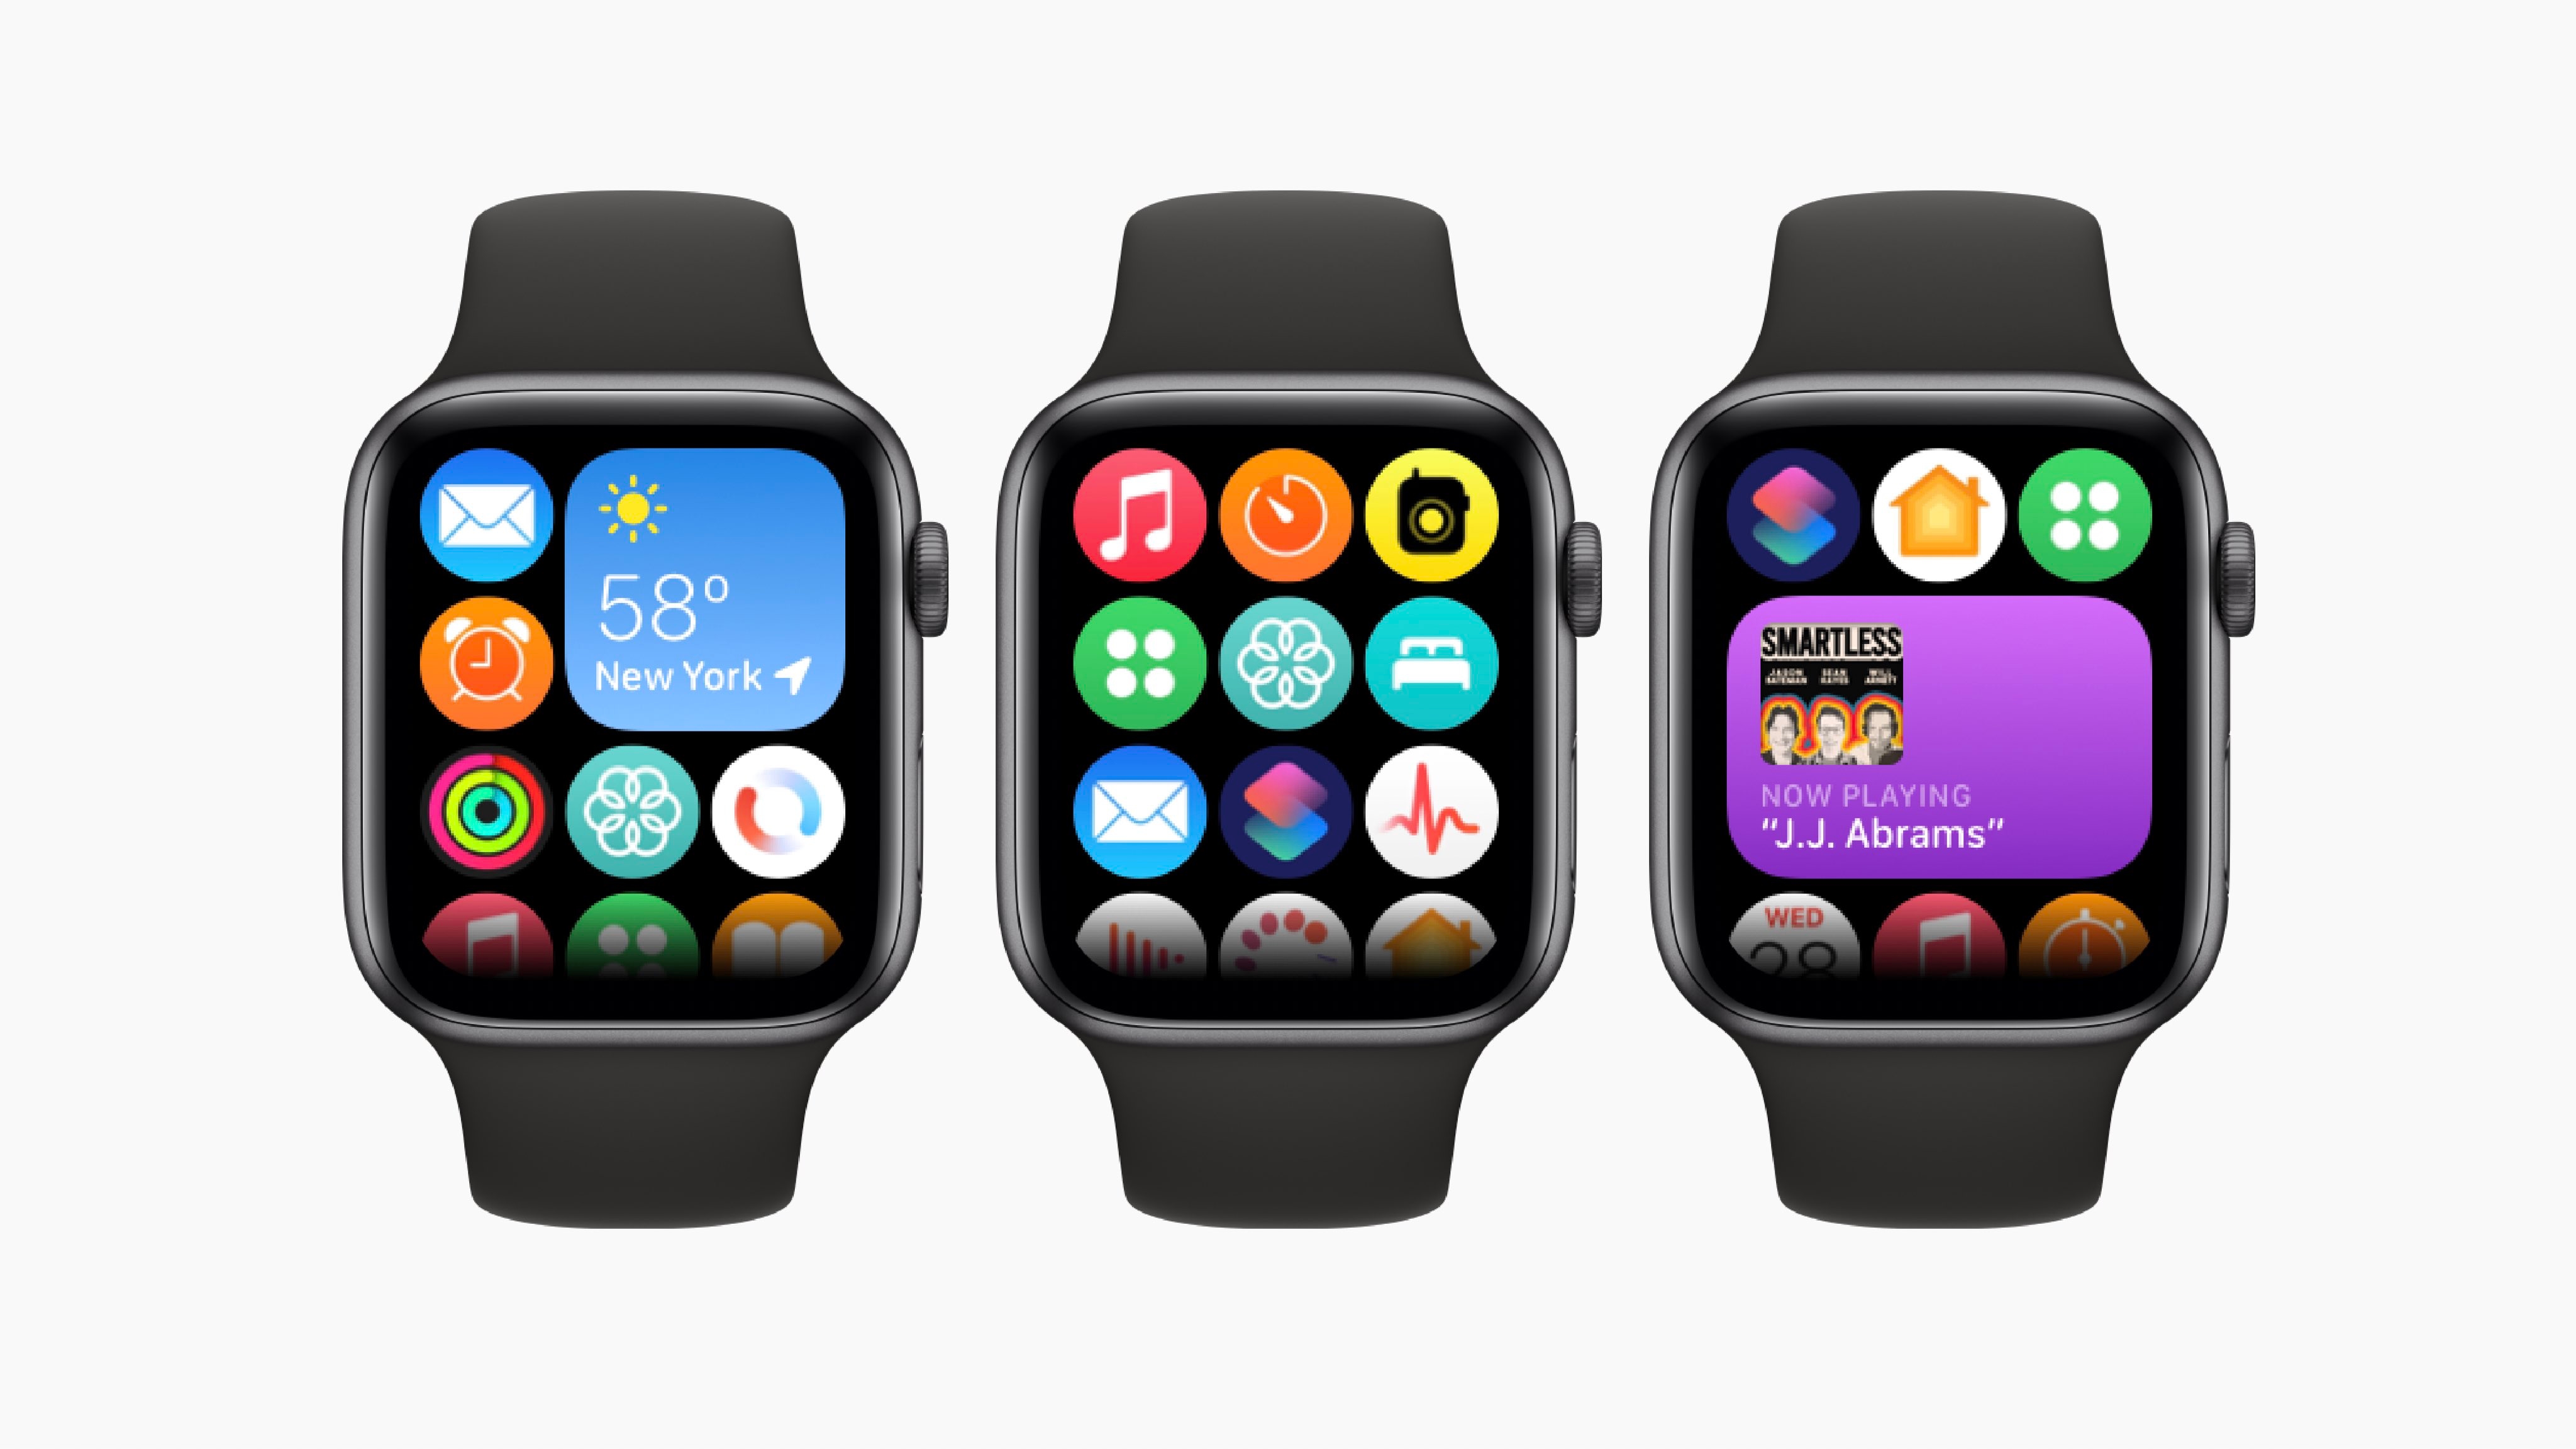 8 smartwatch interface examples and concepts